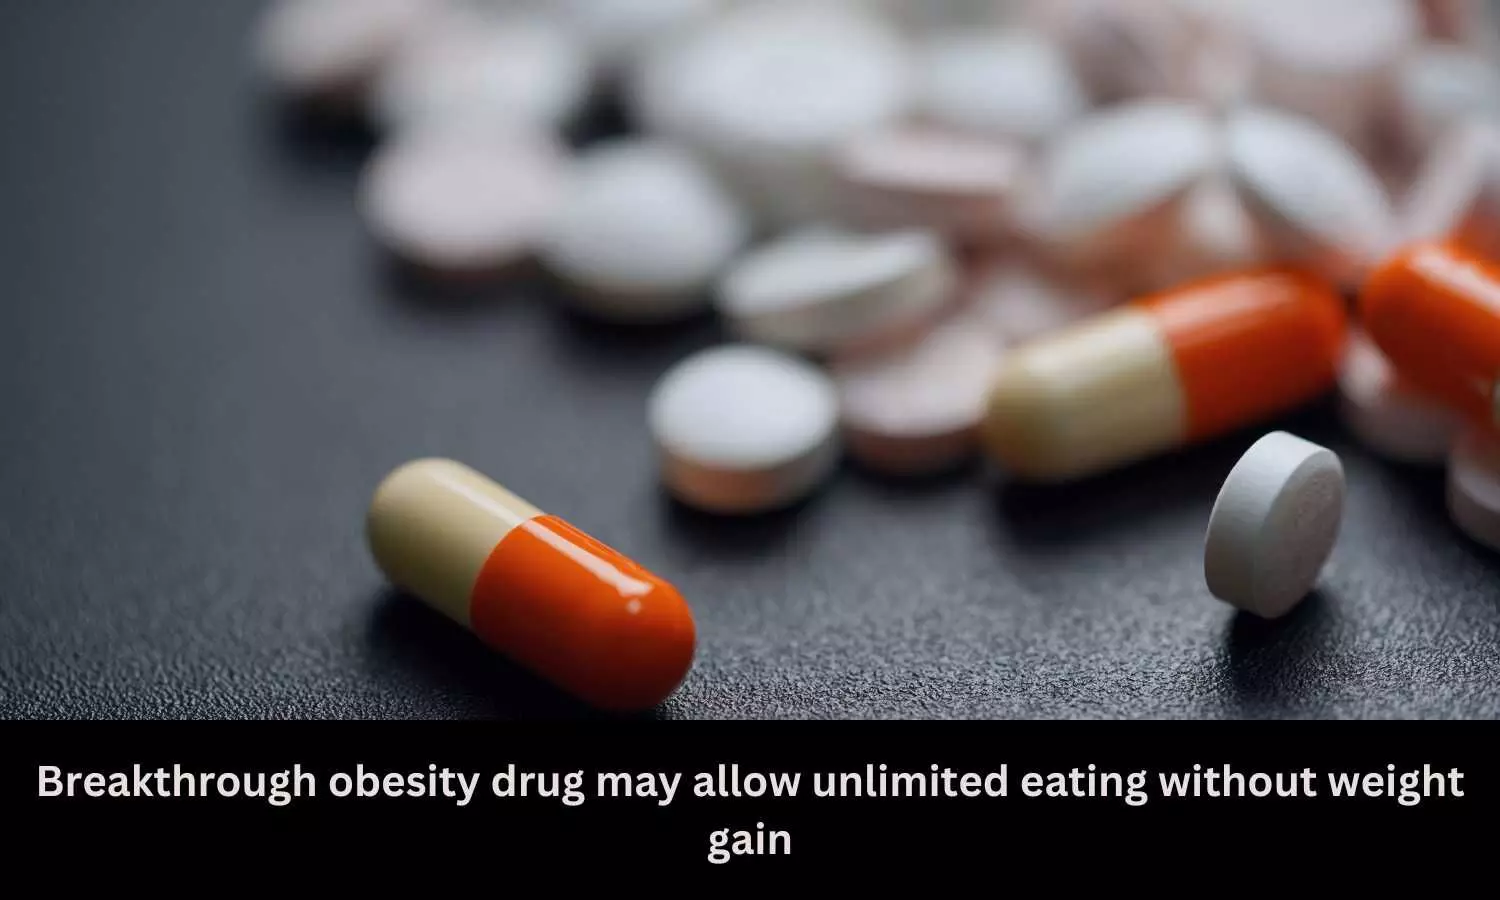 Breakthrough obesity drug may allow unlimited eating without weight gain